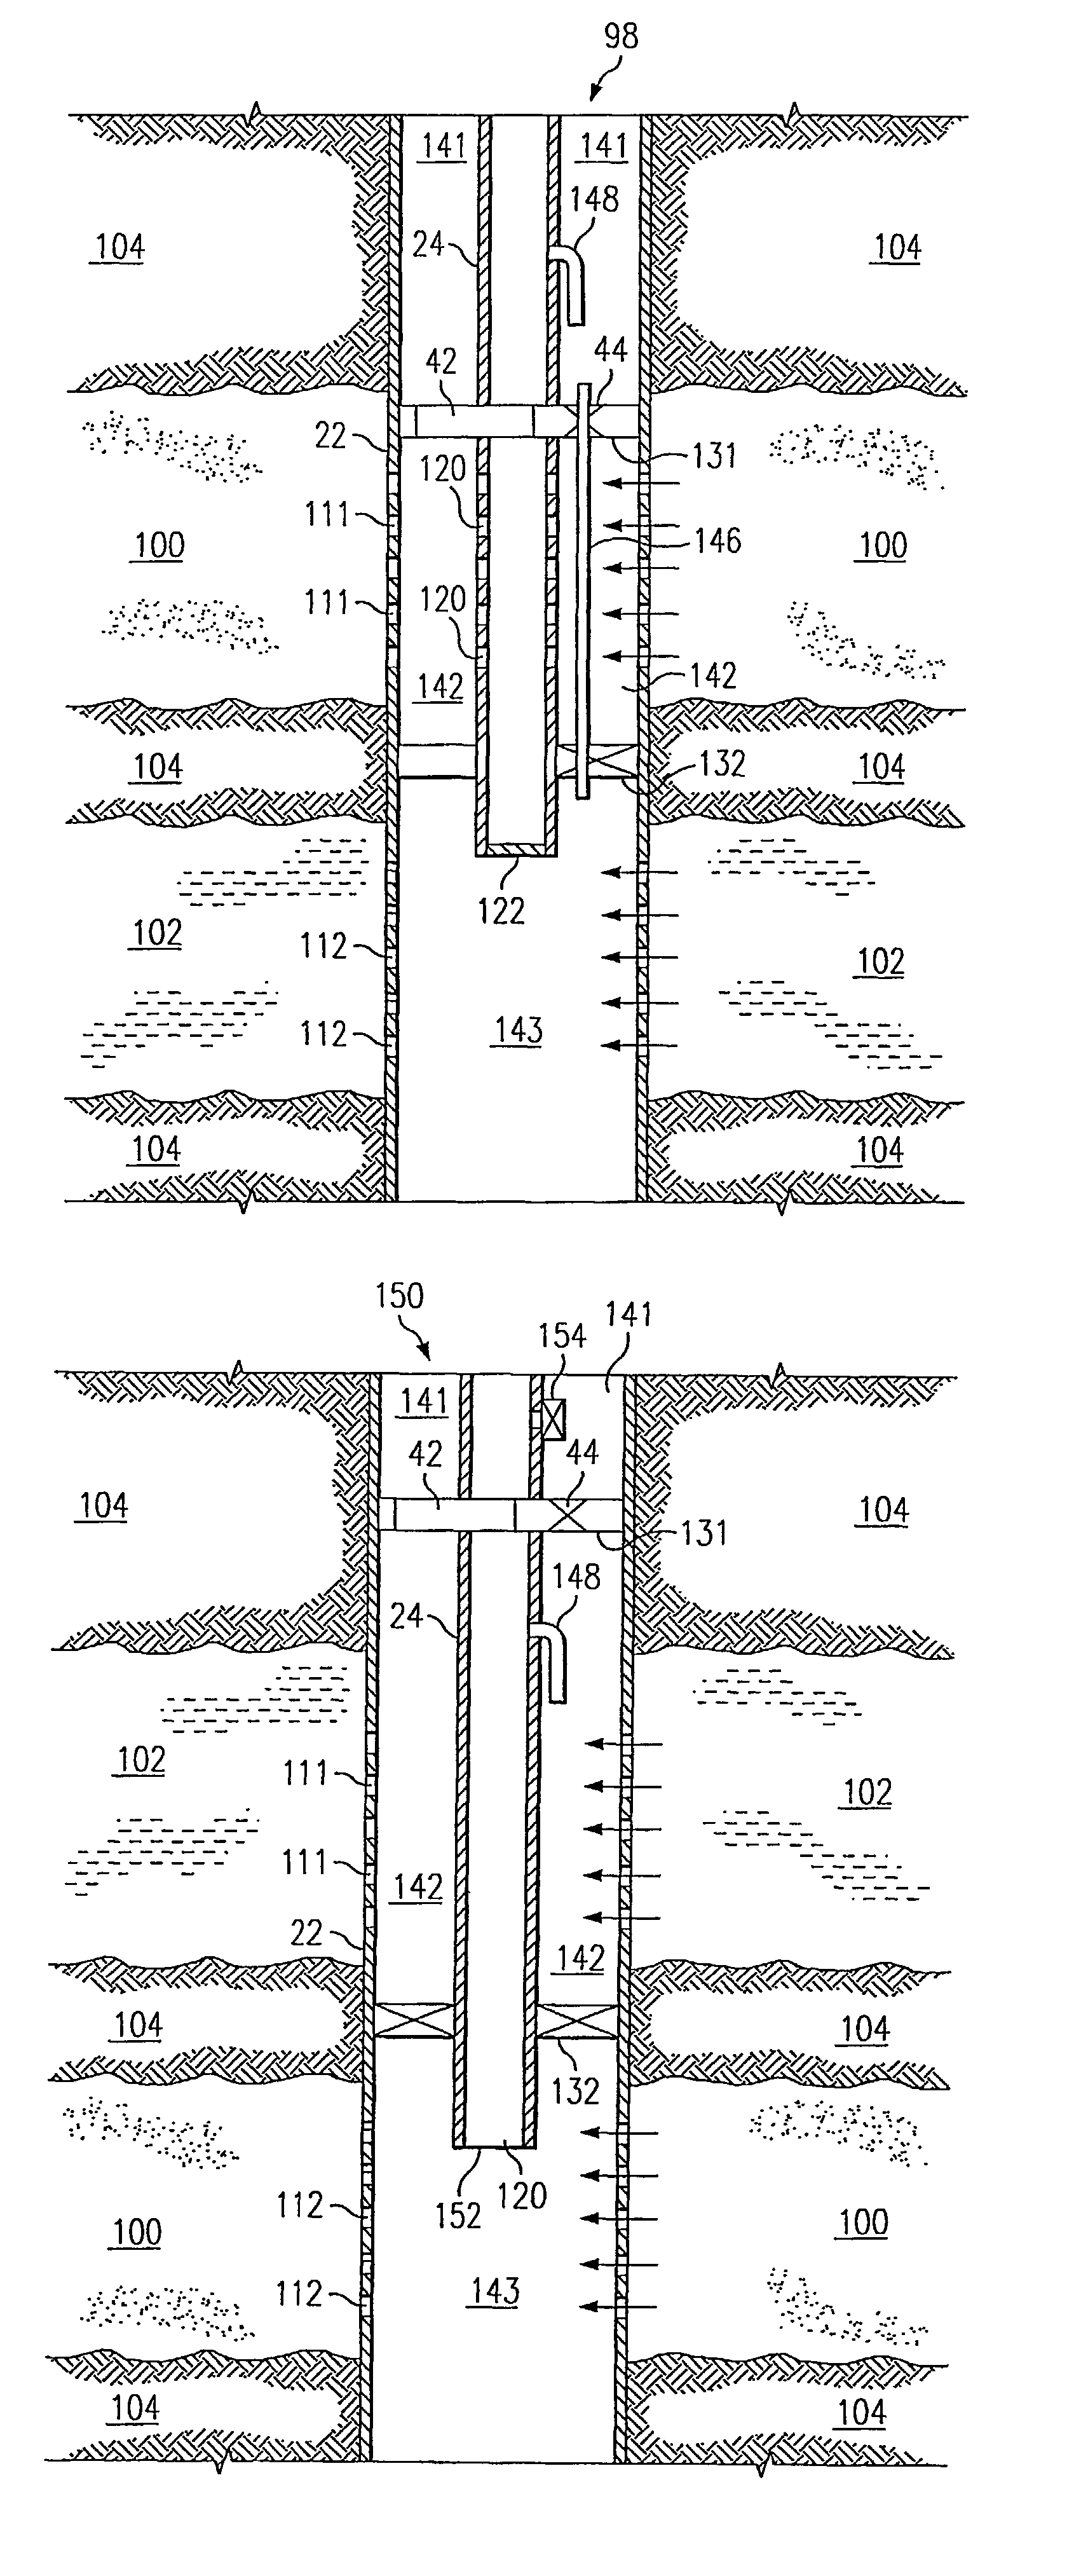 Use of downhole high pressure gas in a gas-lift well and associated methods